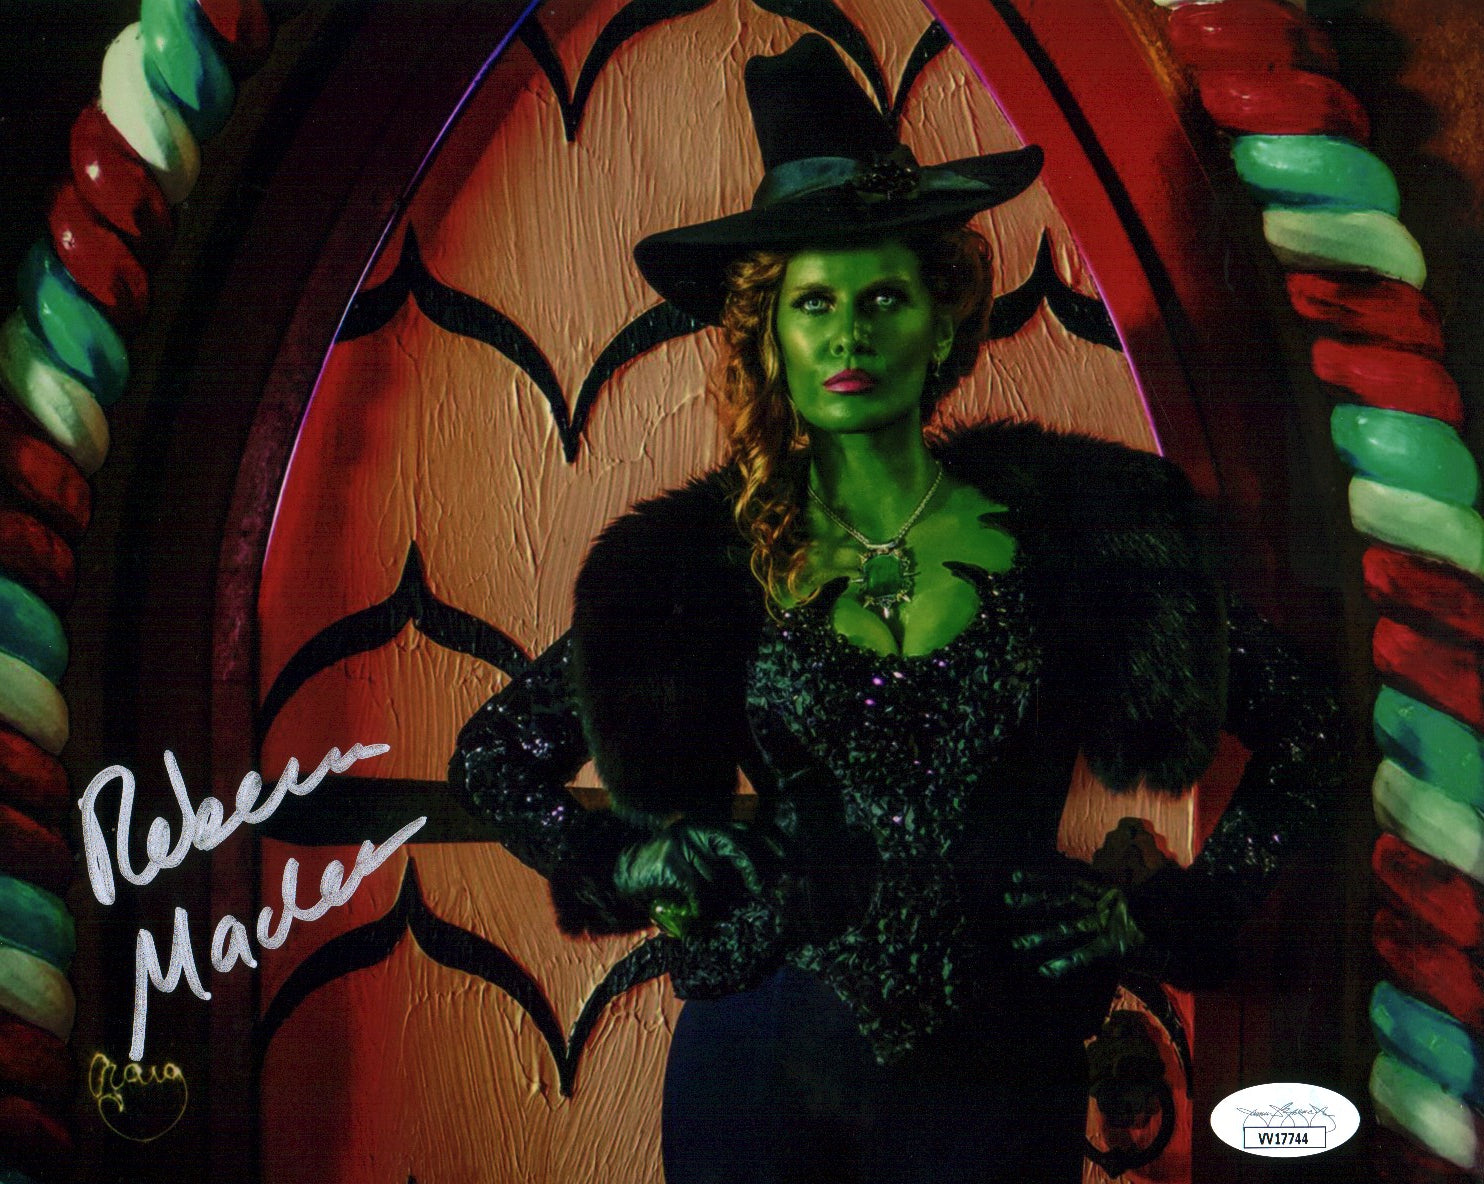 Rebecca Mader Once Upon A Time OUAT 8x10 Signed Photo JSA COA Certified Autograph GalaxyCon